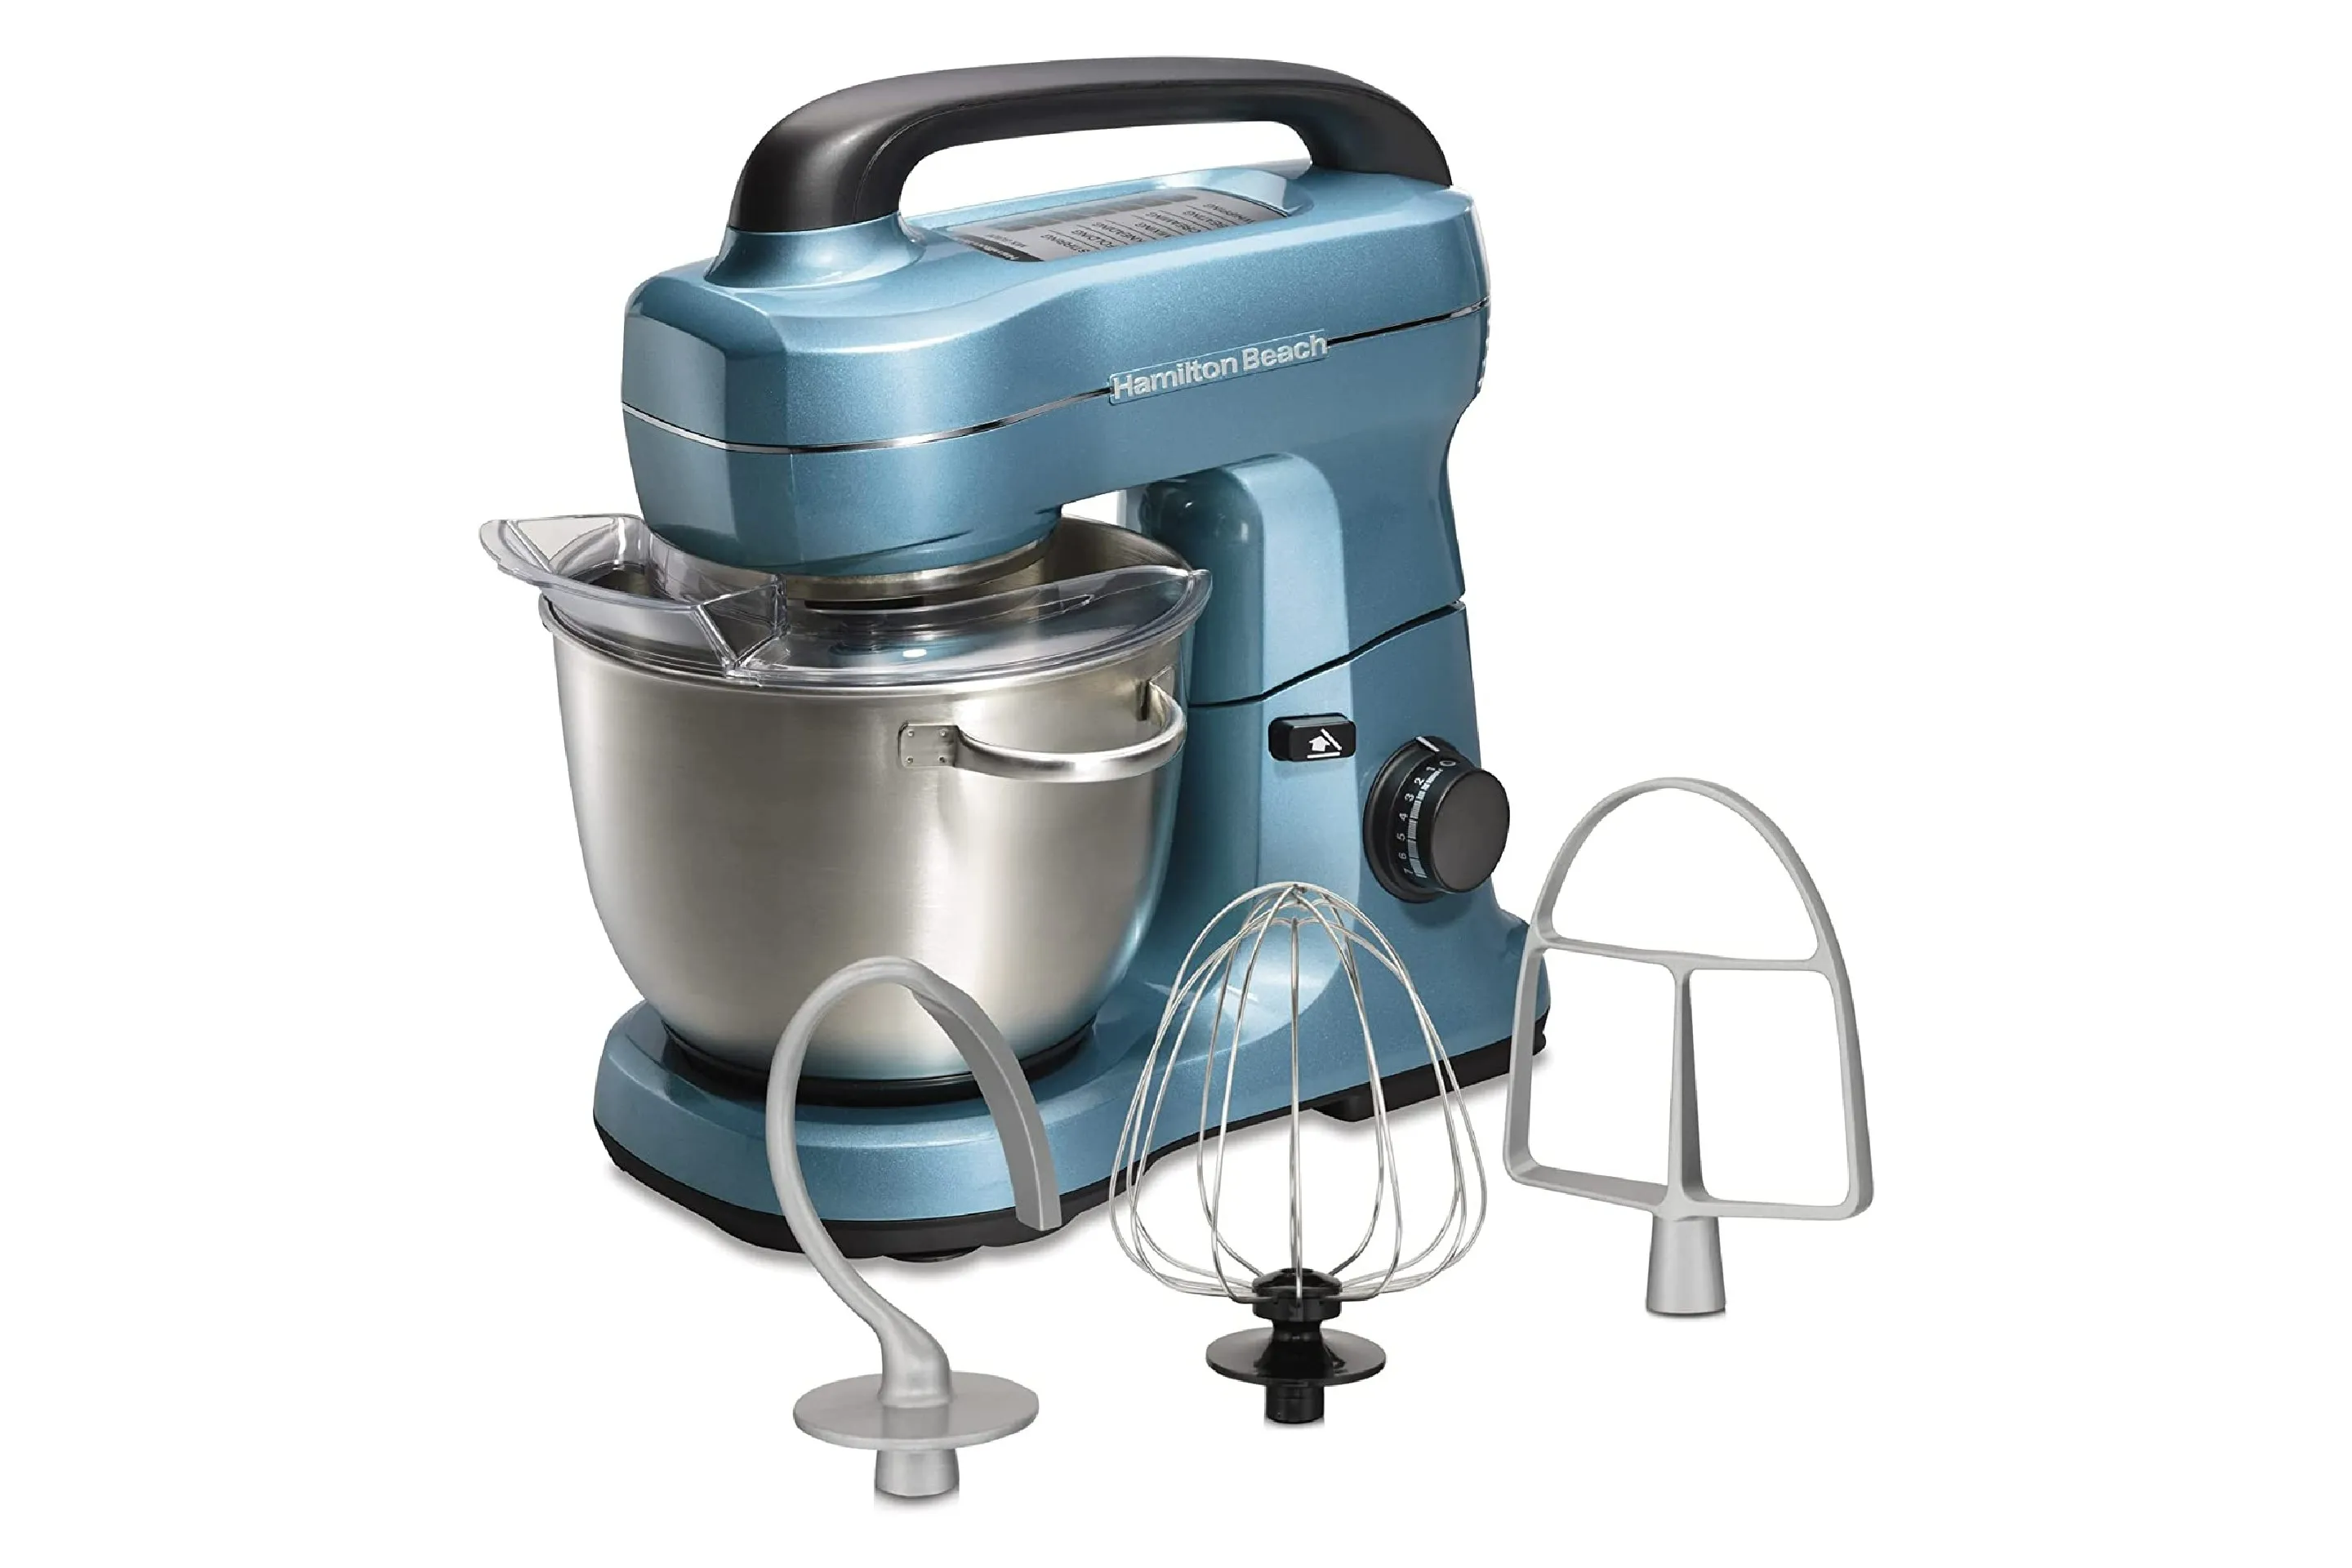 Best stand mixer deal: The Aucma Stand Mixer is $36 off at